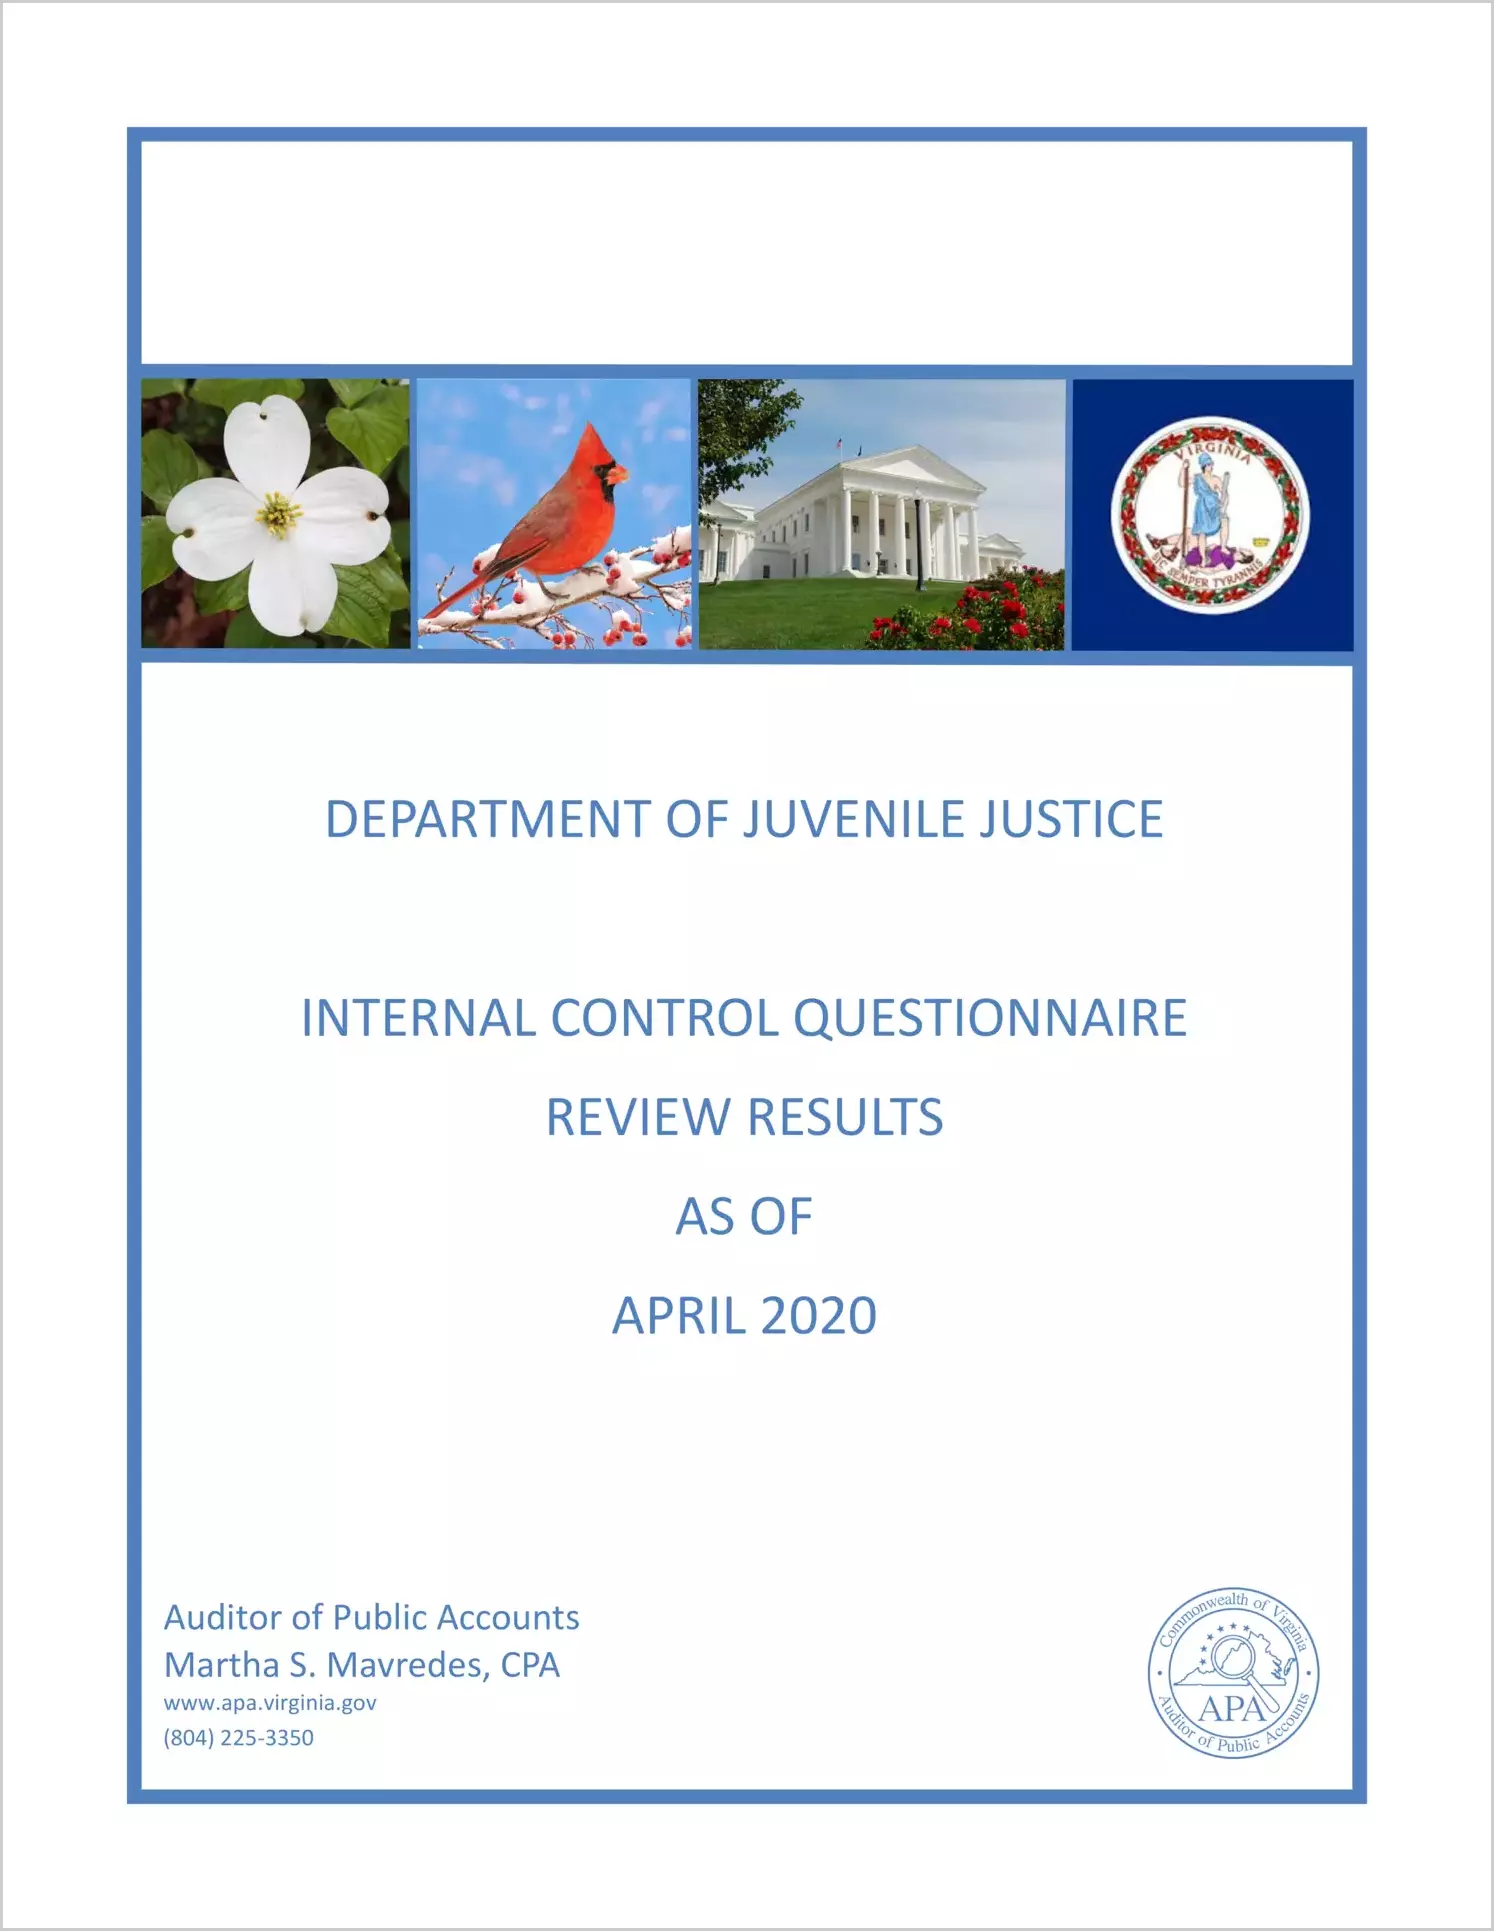 Department of Juvenile Justice Internal Control Questionnaire Review Results as of April 2020